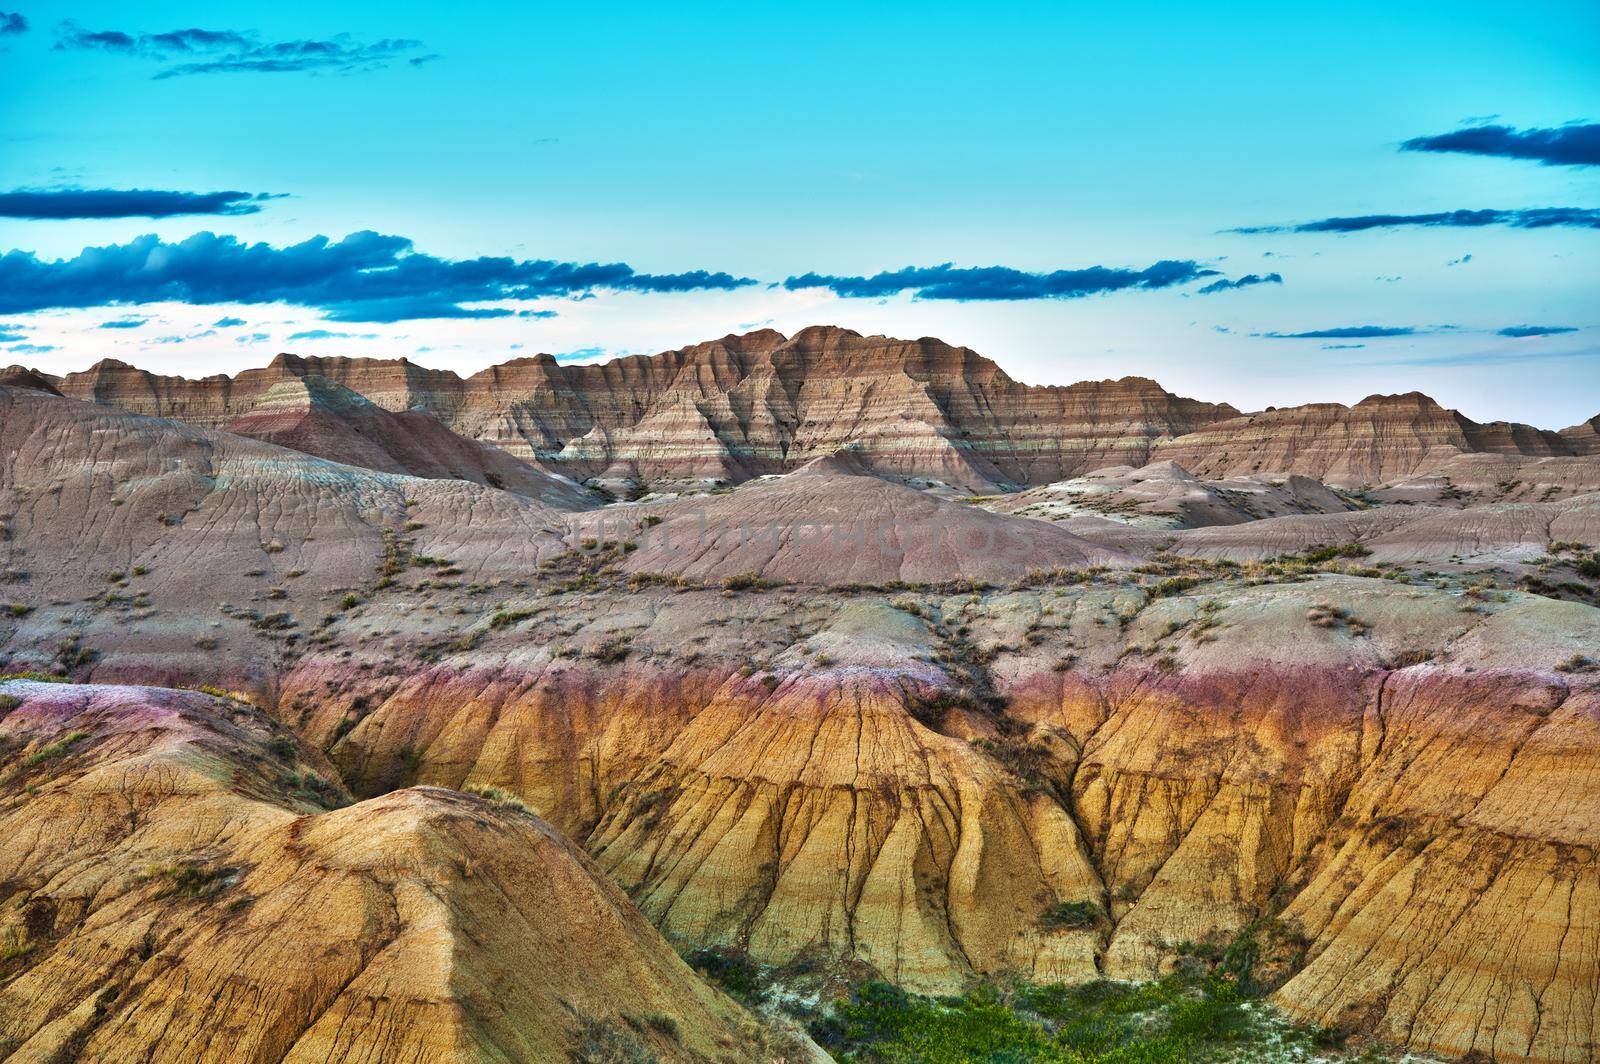 HDR Badlands Formations - HDR Photography. Badlands National Park, South Dakota, USA. Cloudy Blue Horizon, Nature Photo Collection. by welcomia